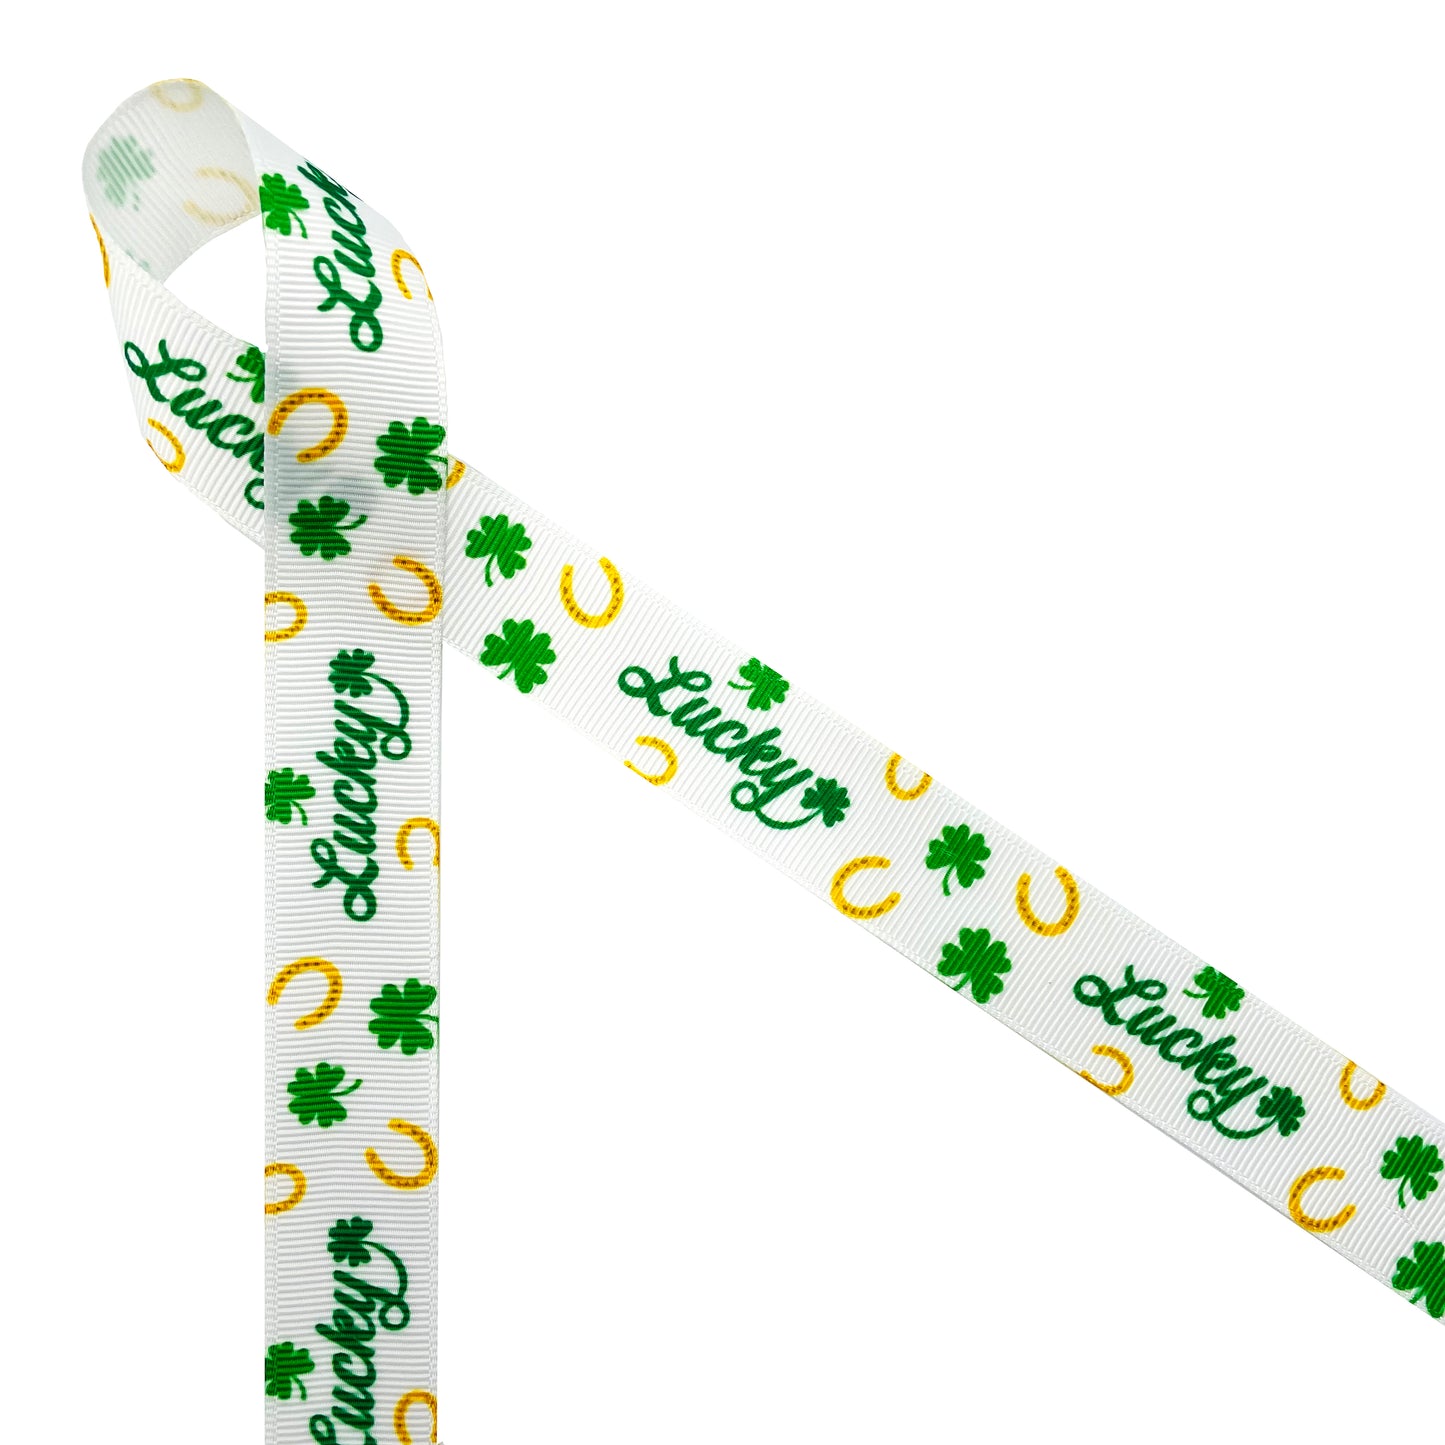 Lucky ribbon for St Patrick's Day  and Equestrian events with horse shoes and tossed shamrocks printed on 7/8" white satin and grosgrain